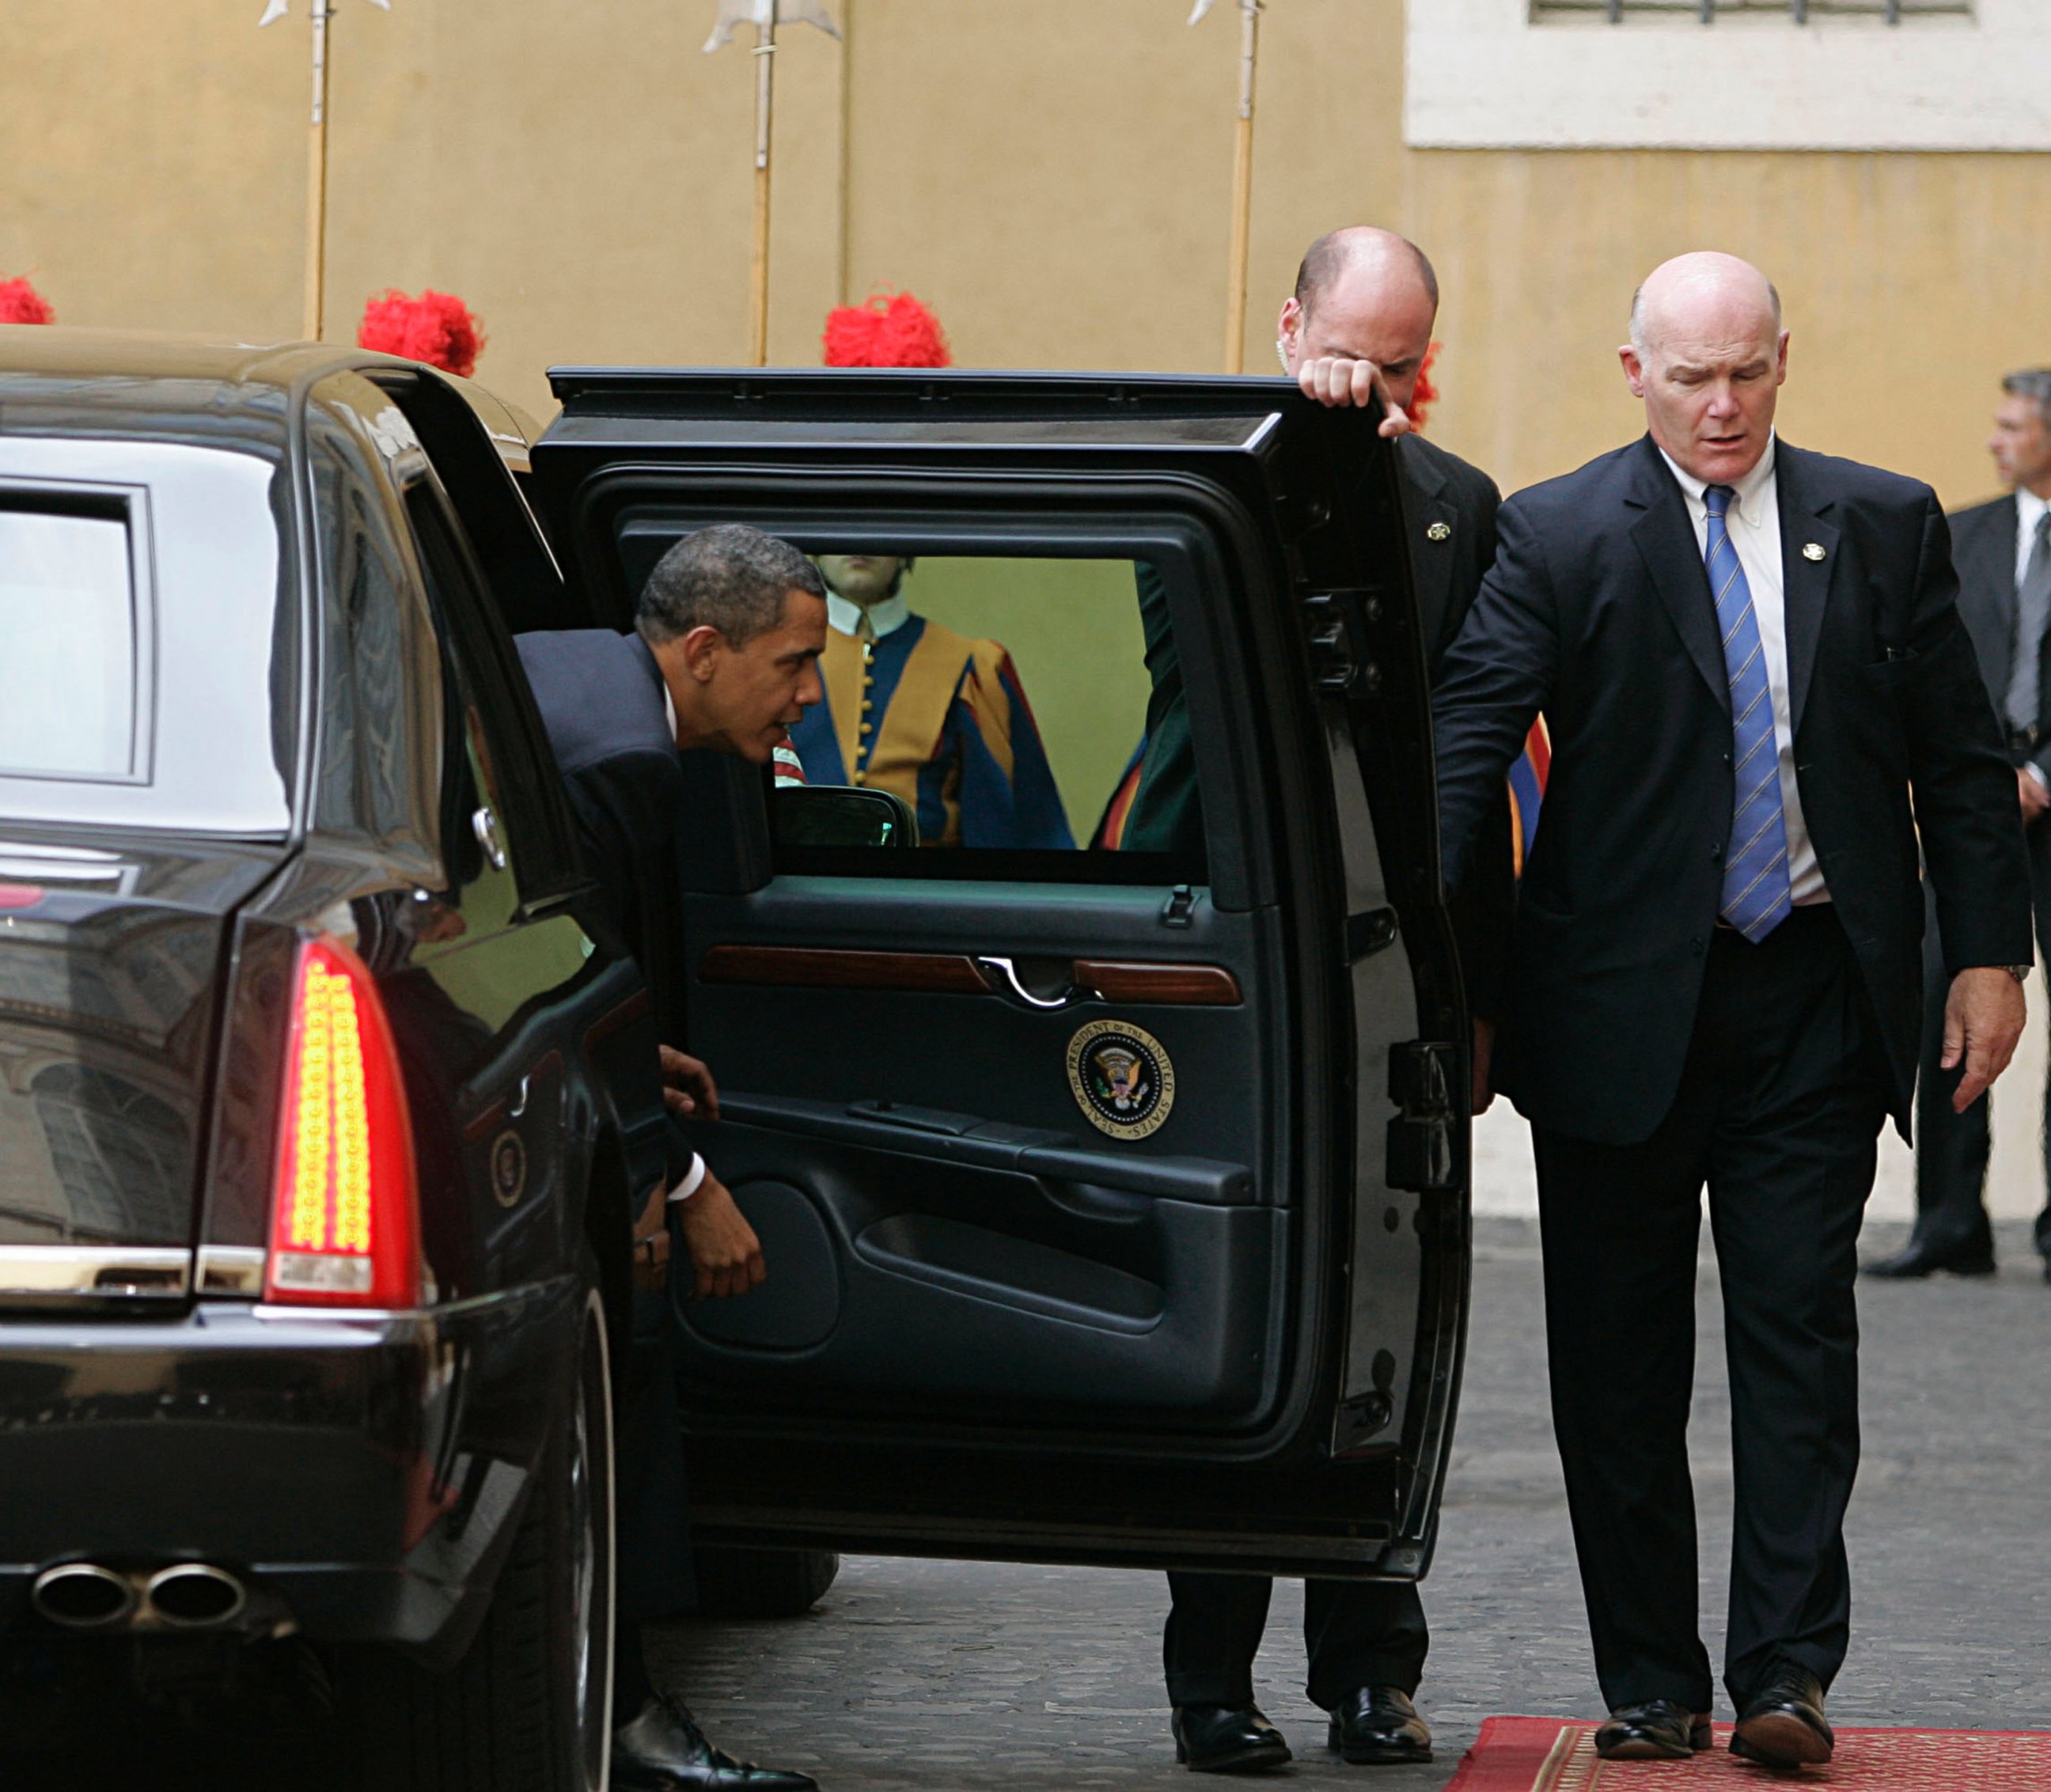 PHOTO: In this July 10, 2009 file photo, Secret Service Agent Joseph Clancy, right, holds the door open for President Barack Obama upon arrival at the Vatican for a meeting with Pope Benedict XVI. 